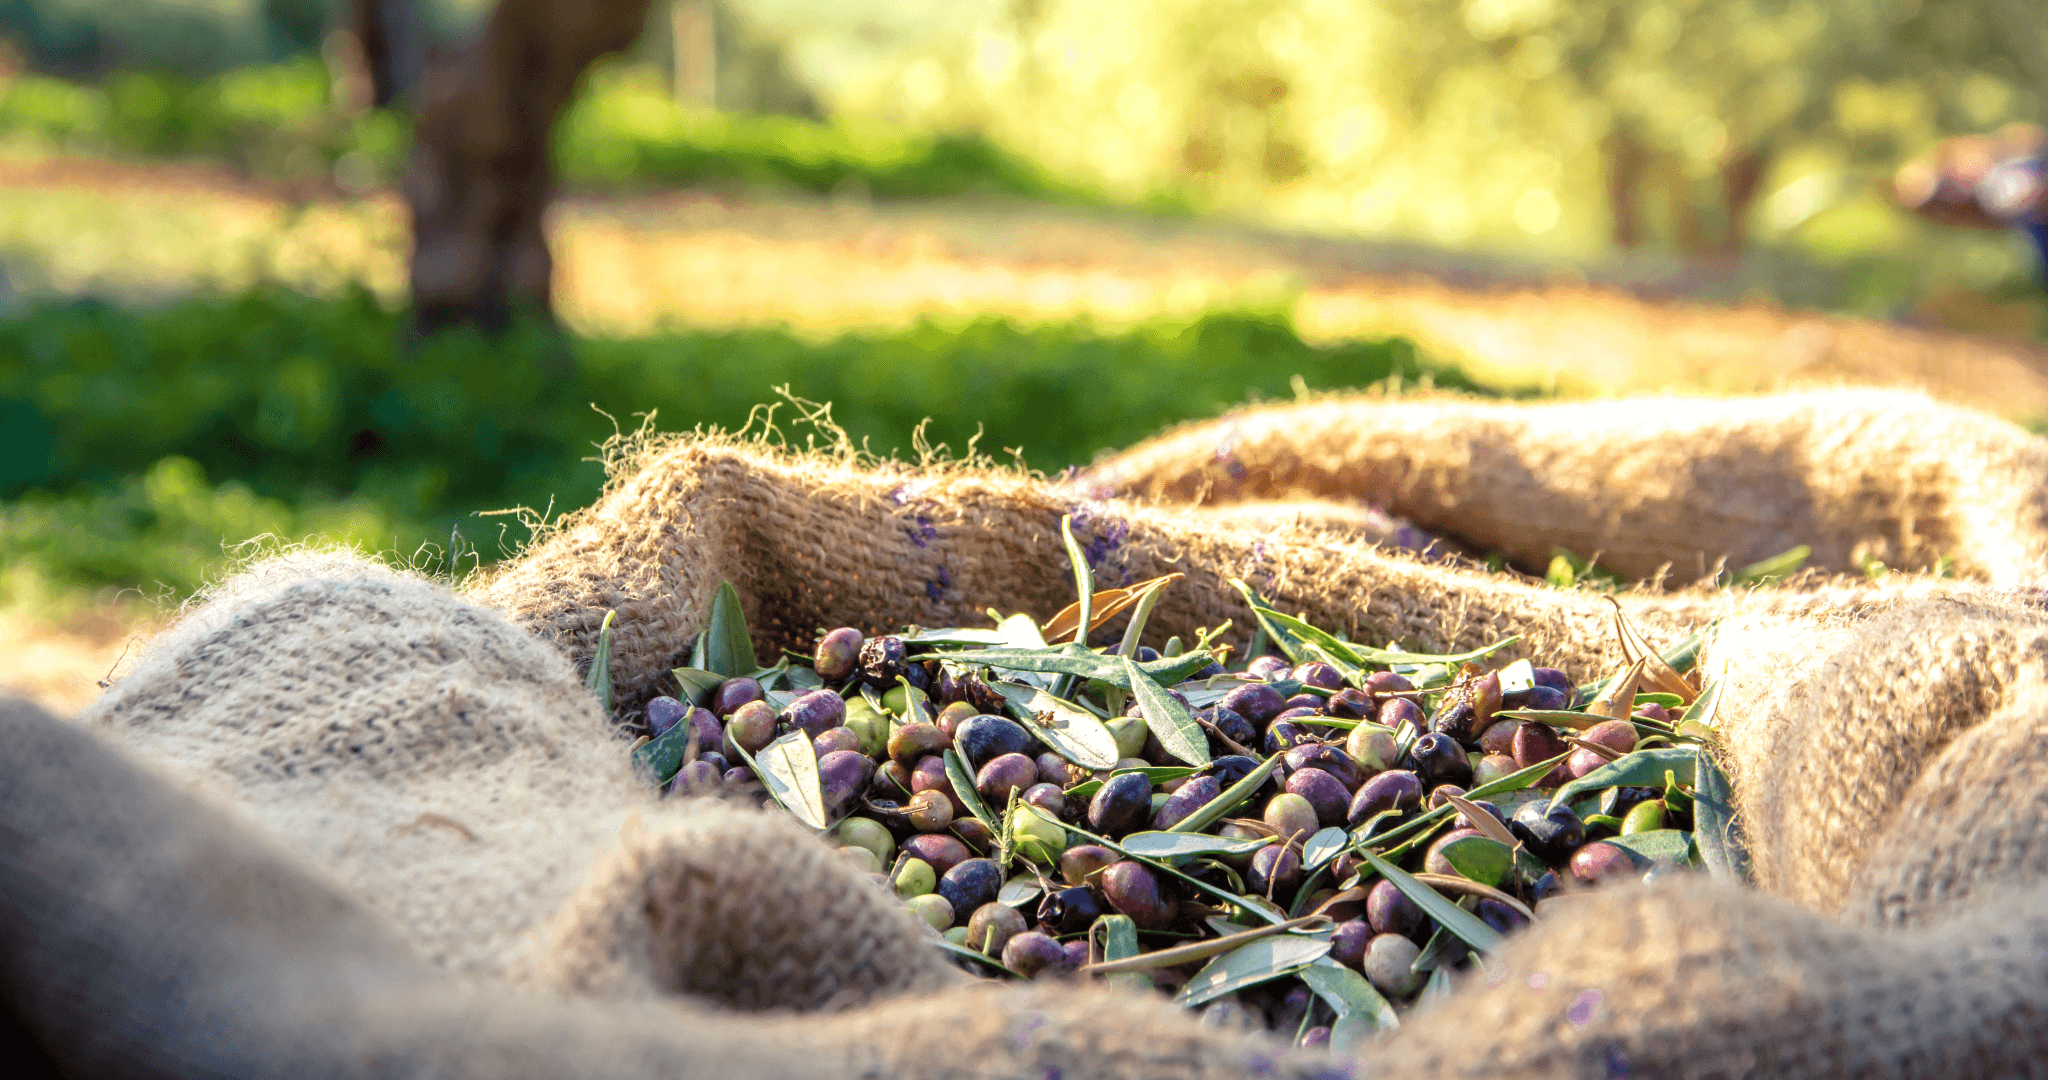 olives being picked in hessian sack